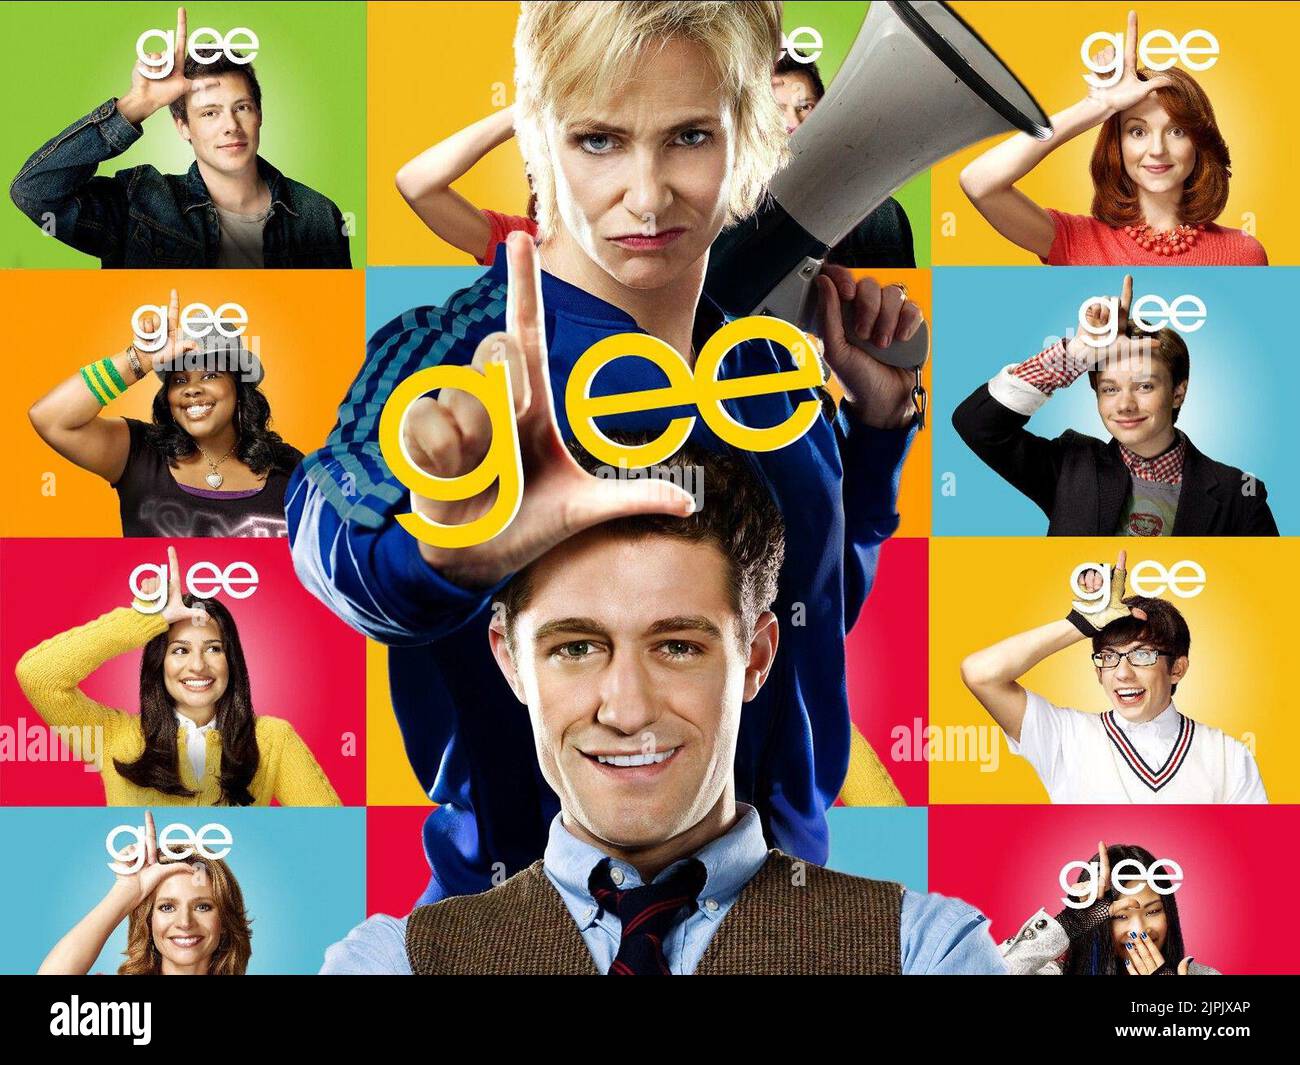 MONTEITH,LYNCH,MAYS,RILEY,COLFER,MICHELE,MCHALE,GILSIG,MORRISON,POSTER, GLEE: THE 3D CONCERT MOVIE, 2011 Stock Photo